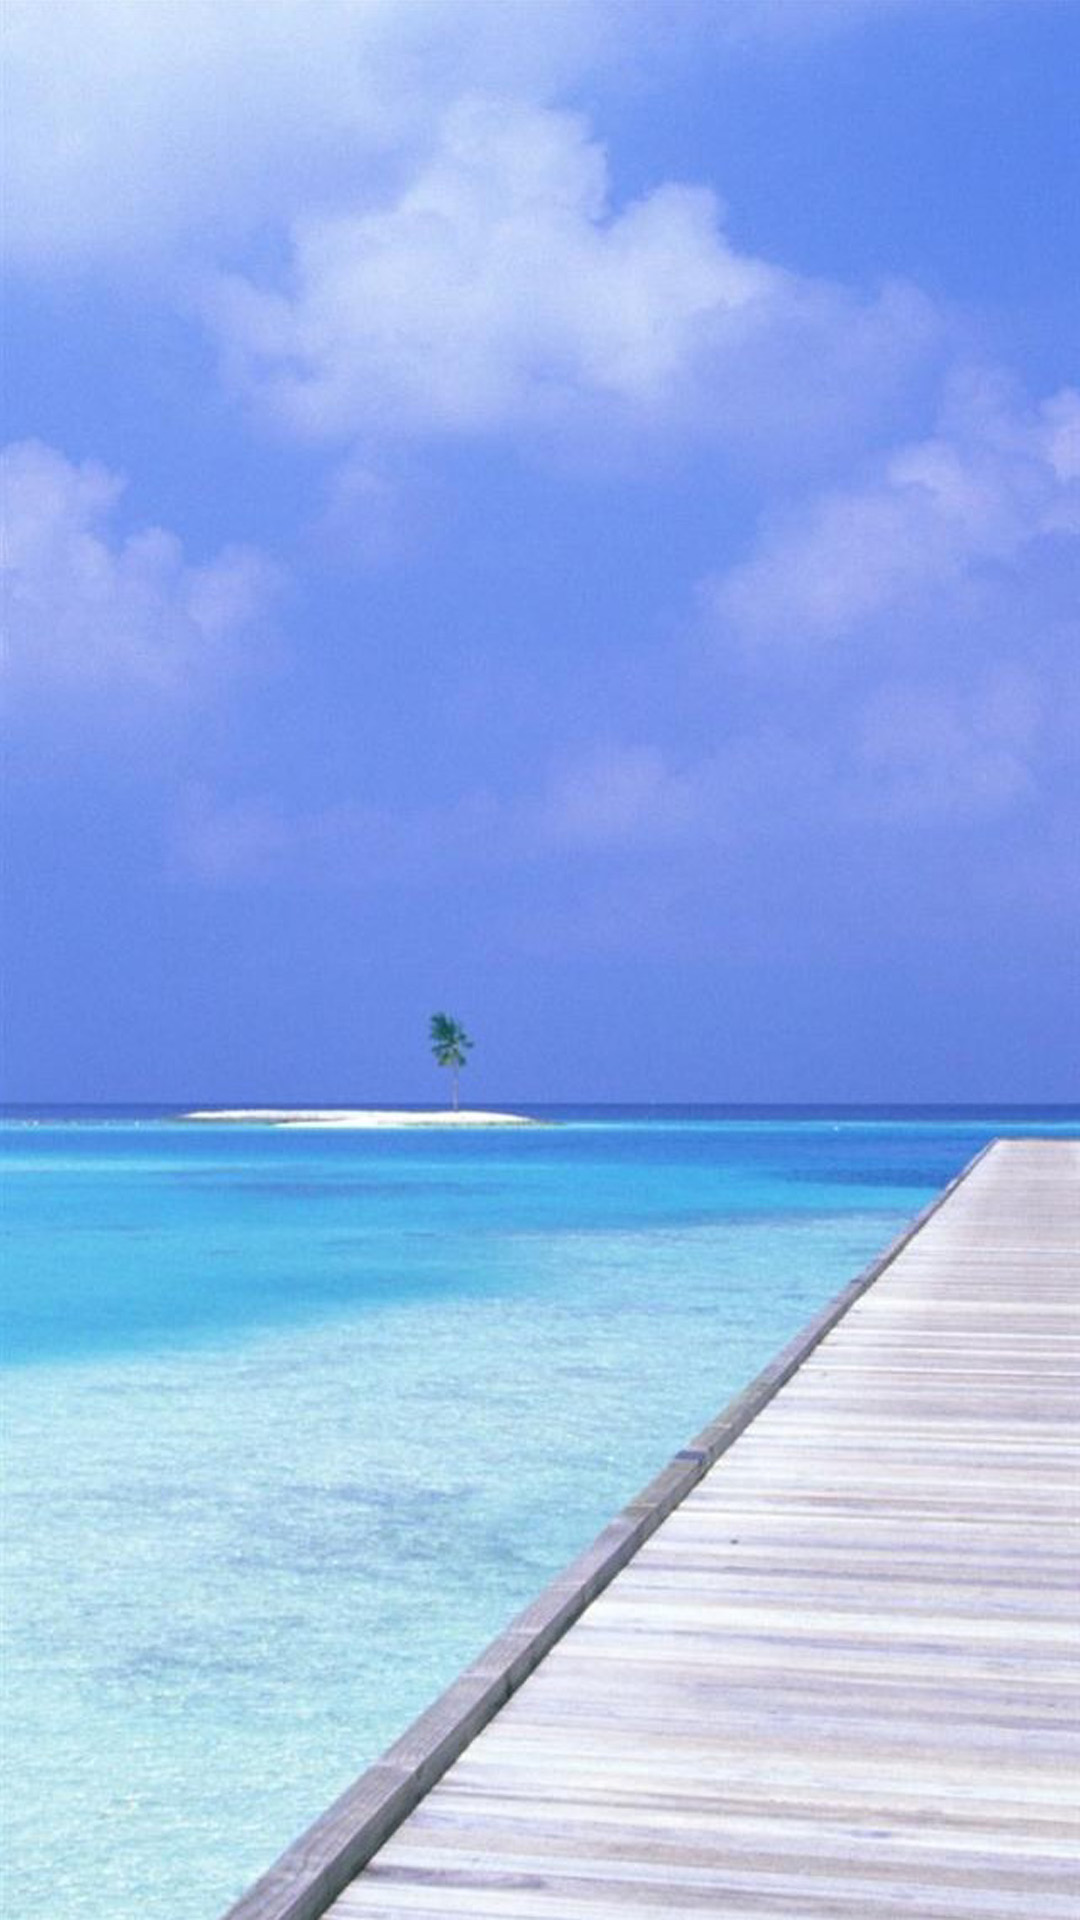 Tropical Island on Beach Android wallpaper